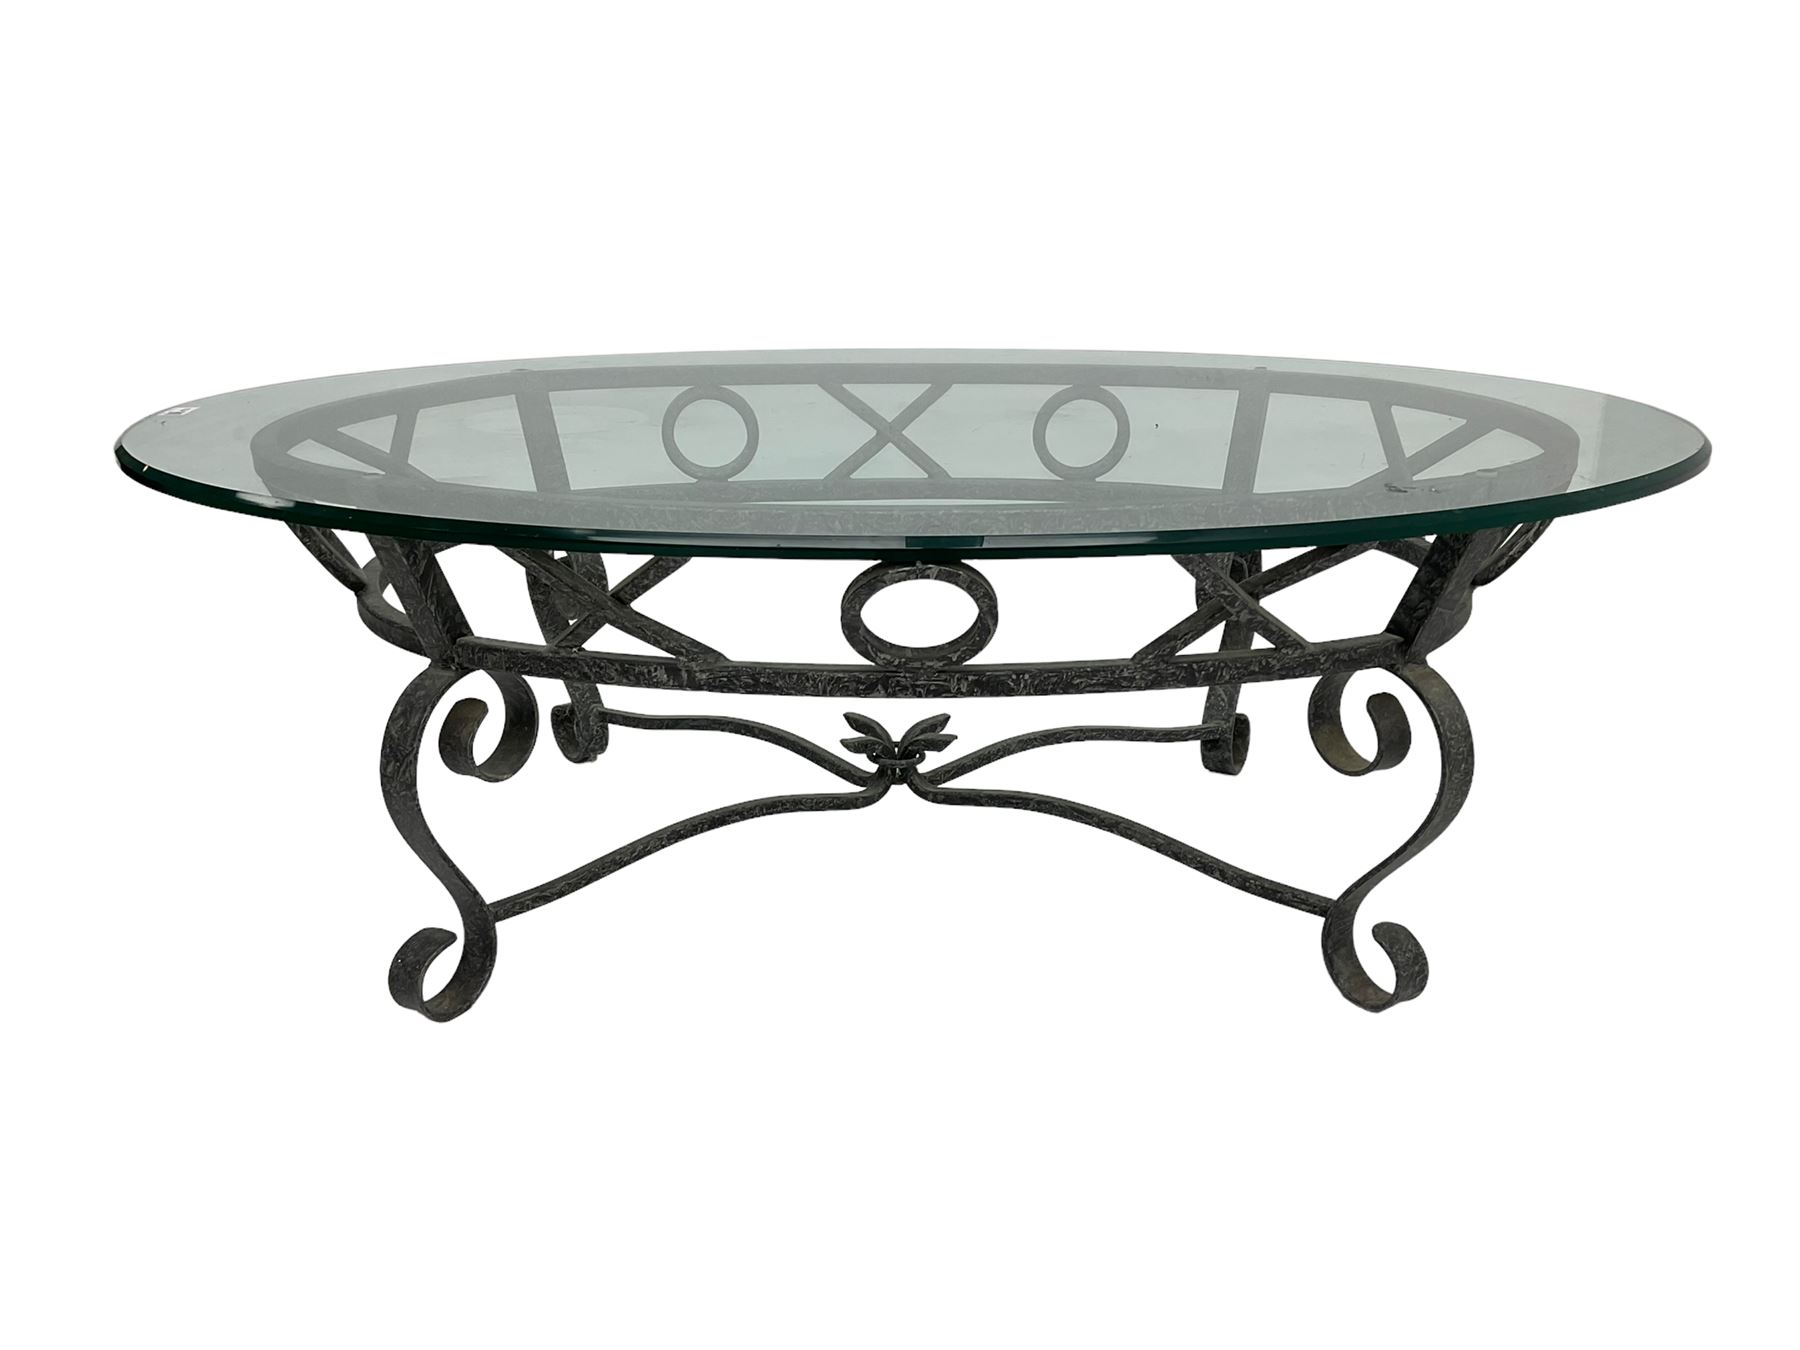 Wrought metal and glass top oval coffee table - Image 2 of 4